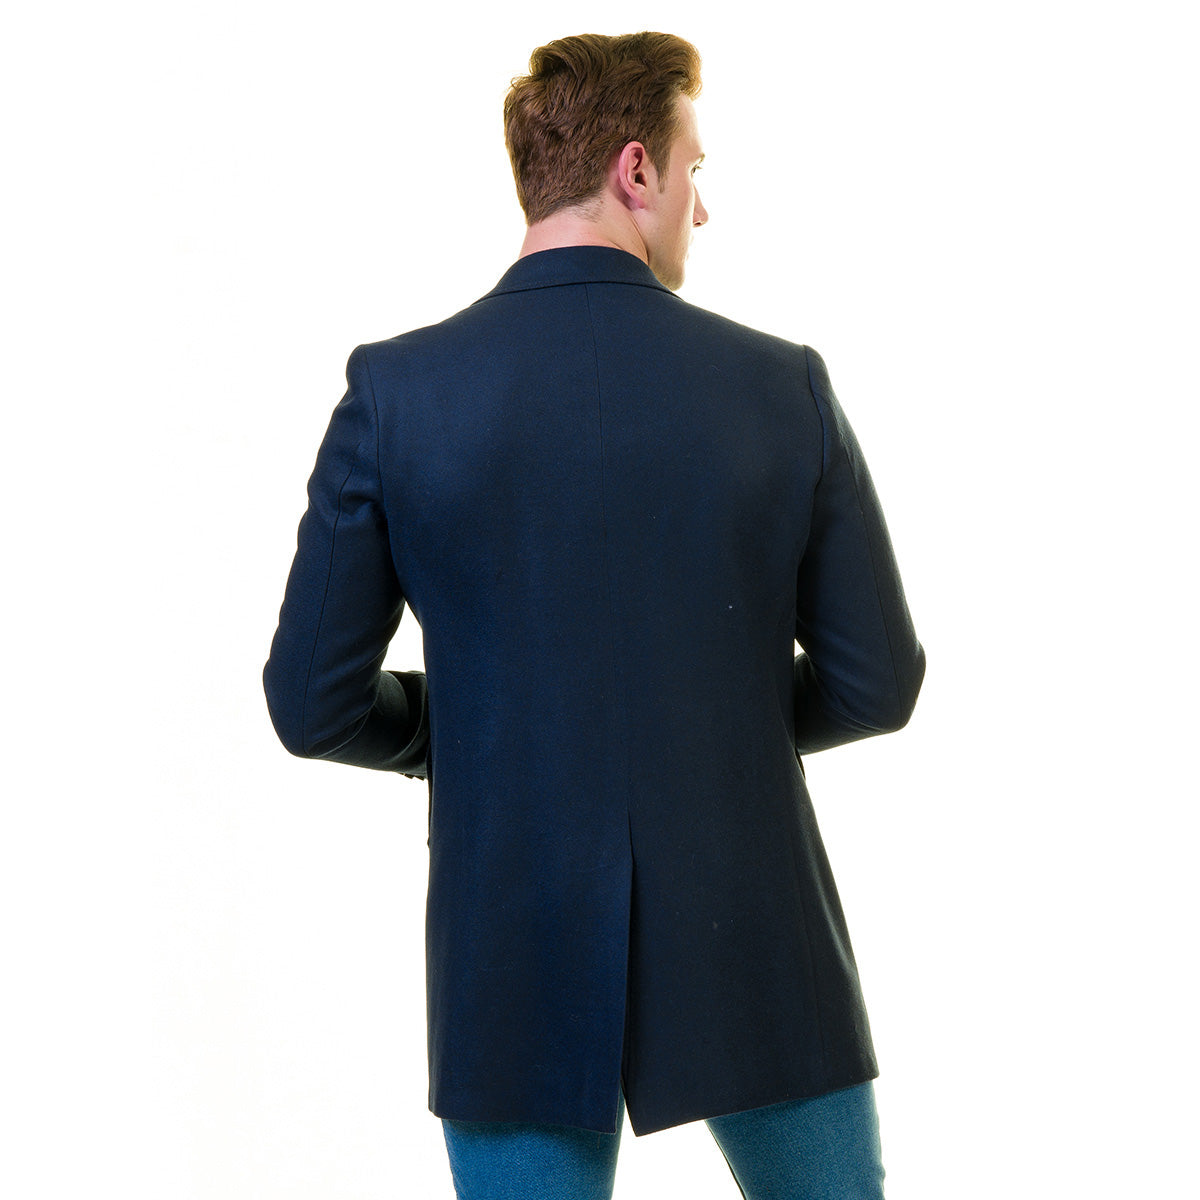 Men's European Blue Wool Coat Jacket Tailor fit Fine Luxury Quality Work and Casual